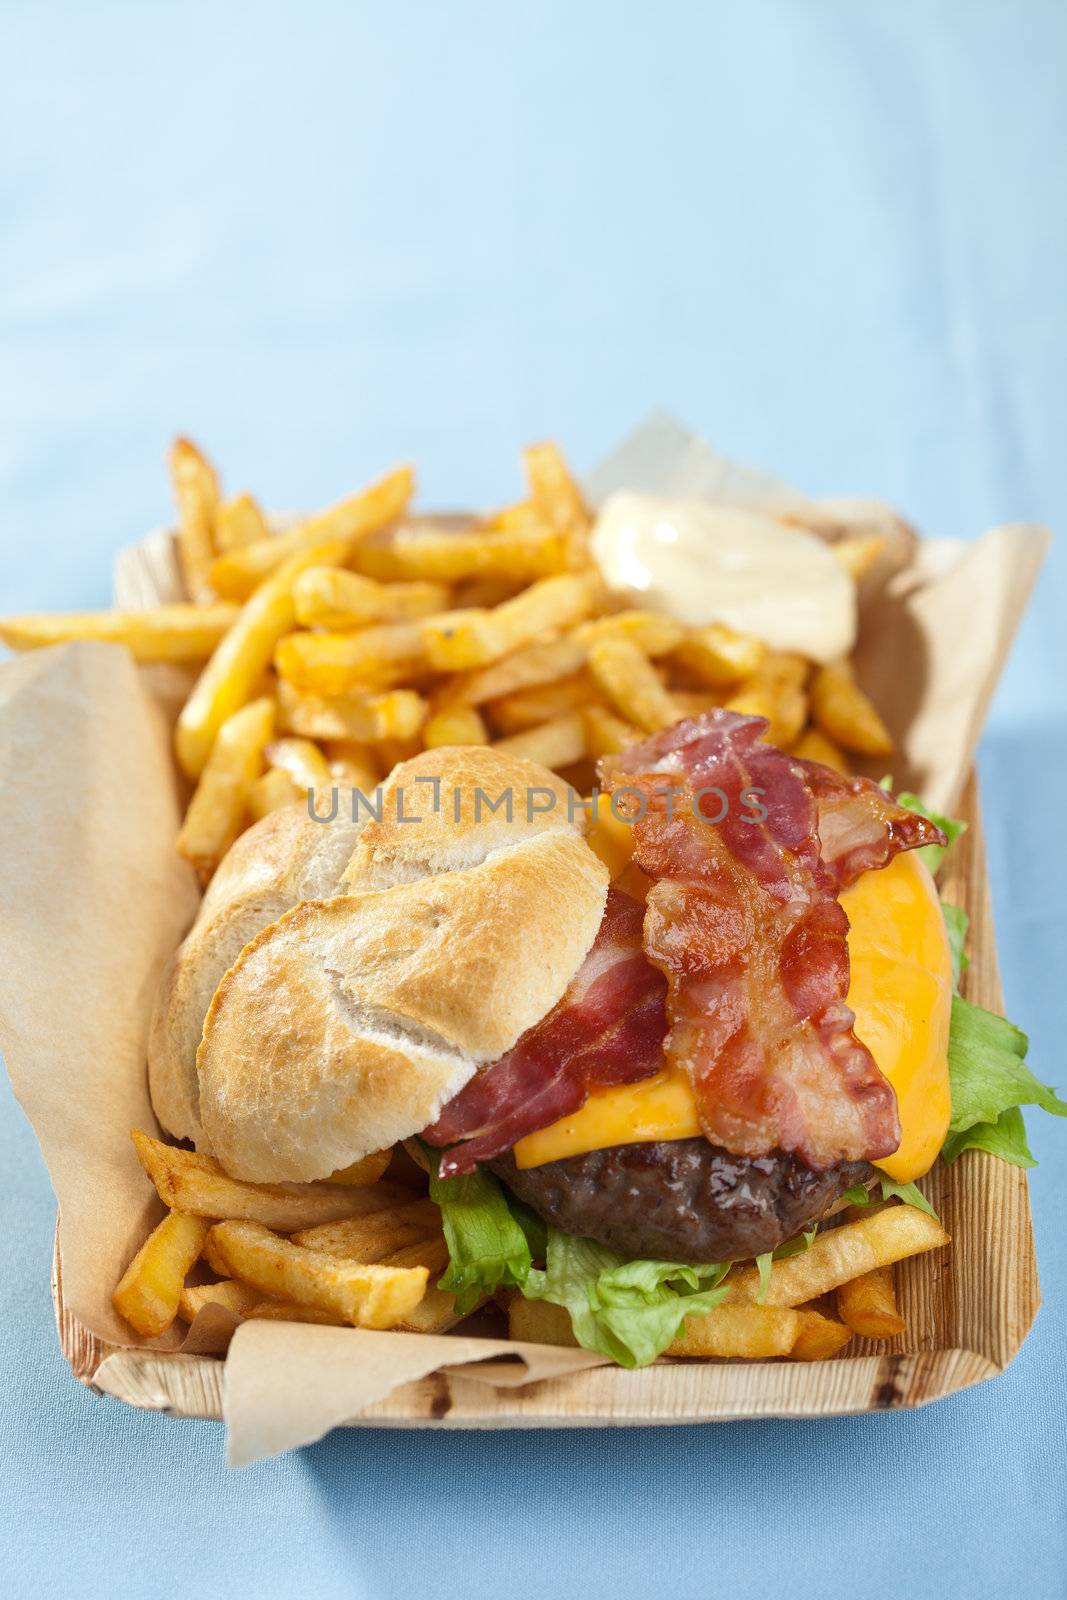 Cheeseburger with bacon and fries by Fotosmurf